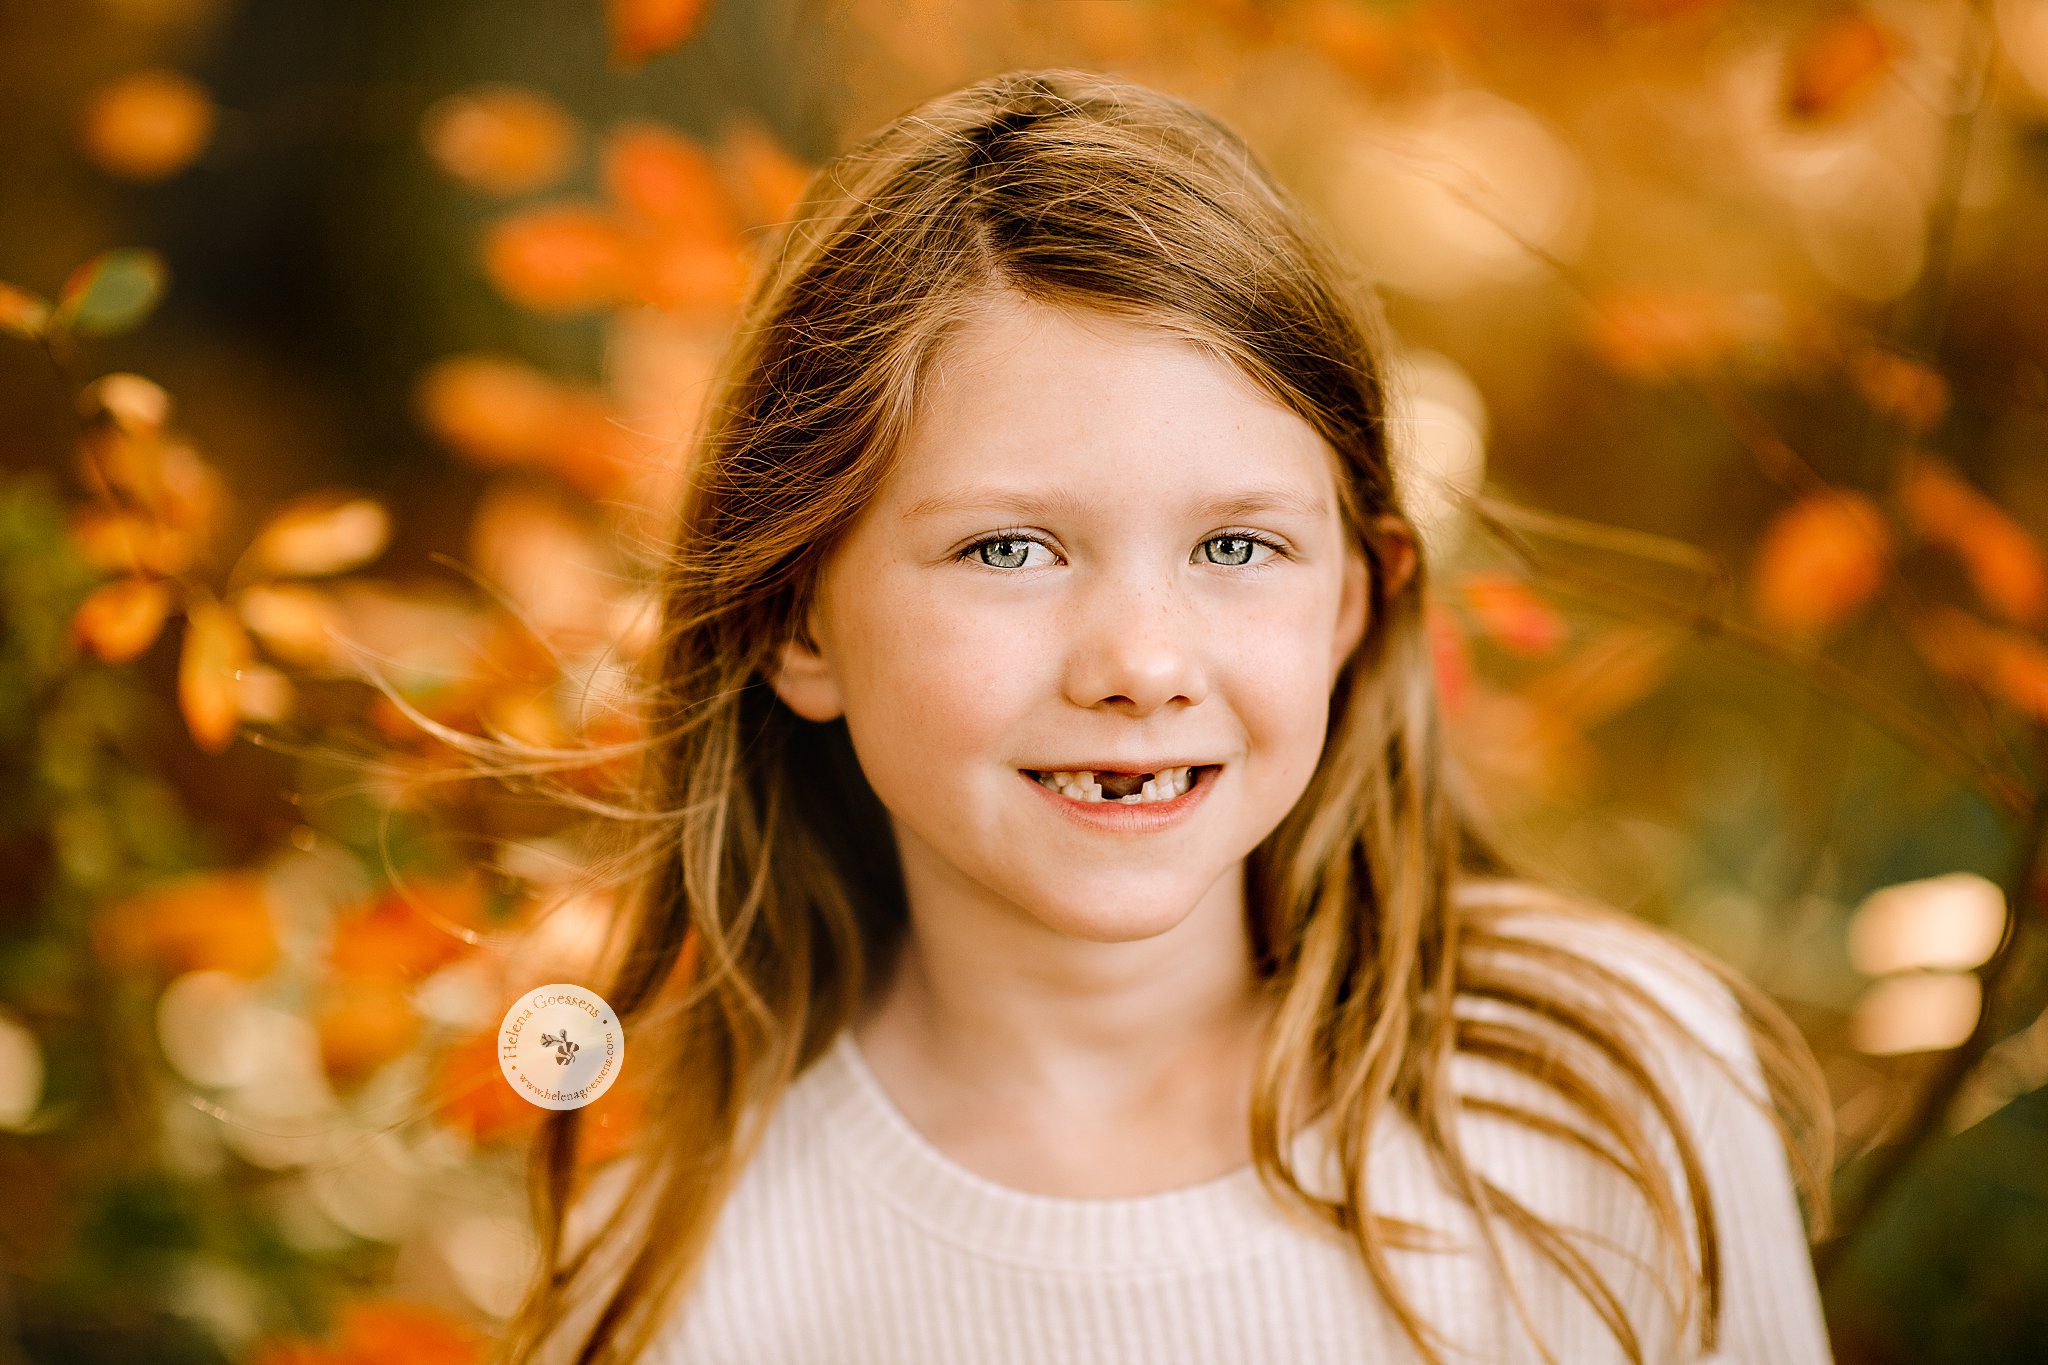 Helena Goessens Photography captures young girl who lost teeth in Canton MA